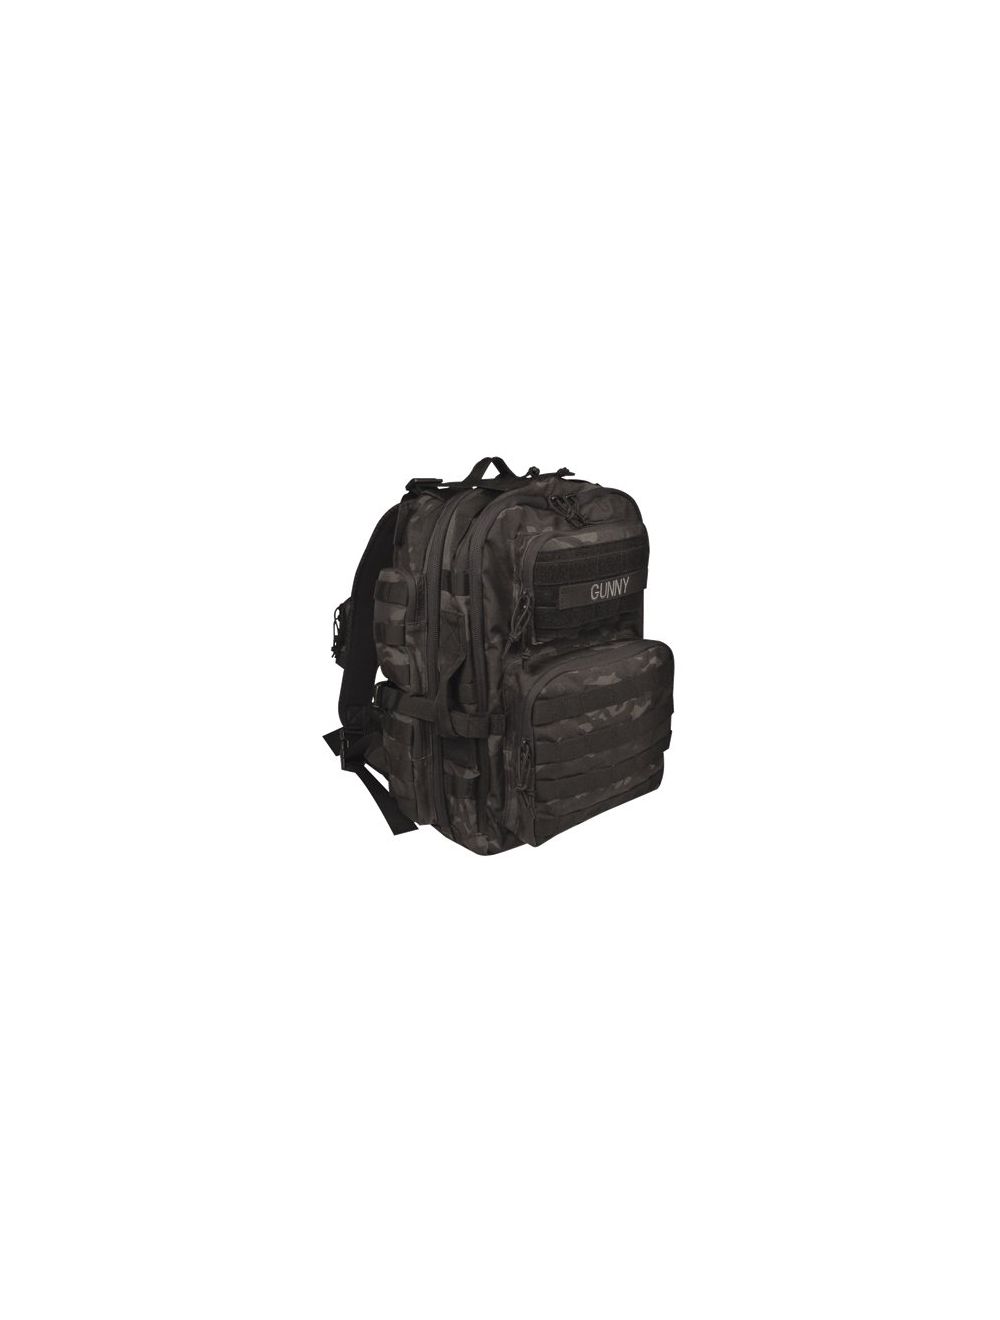 Tour of Duty Backpack